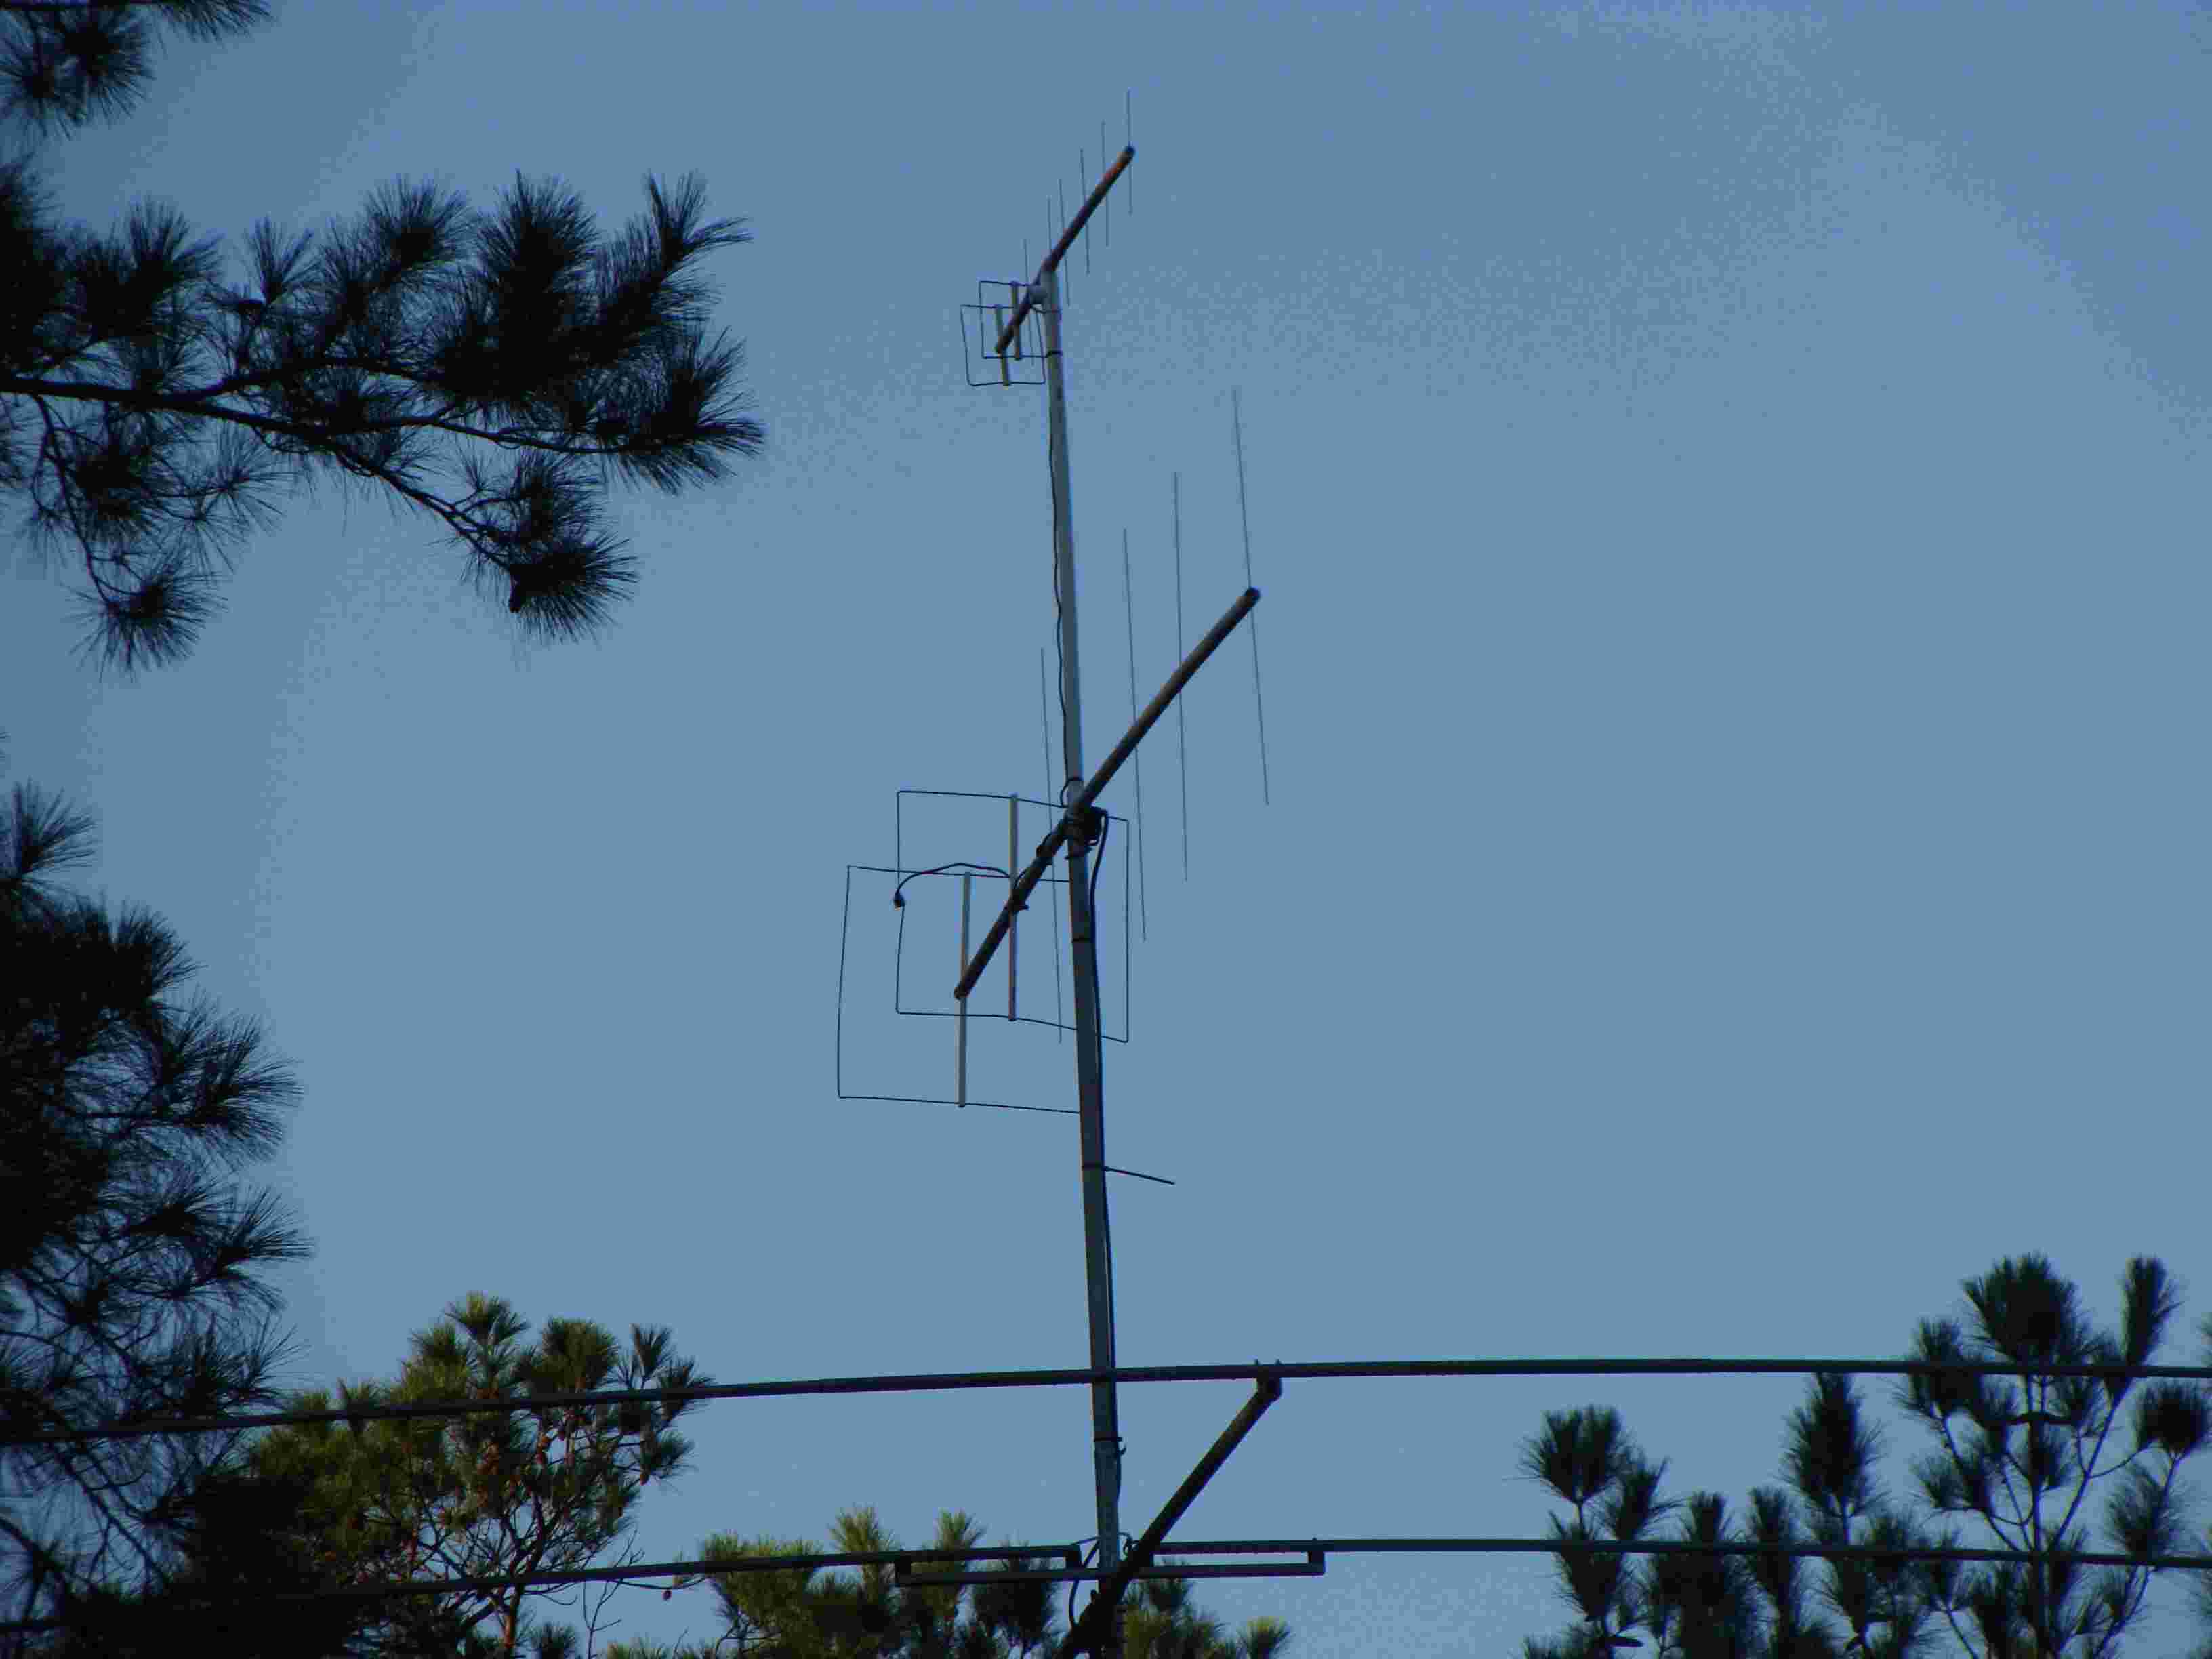 Antenna's at top of tower